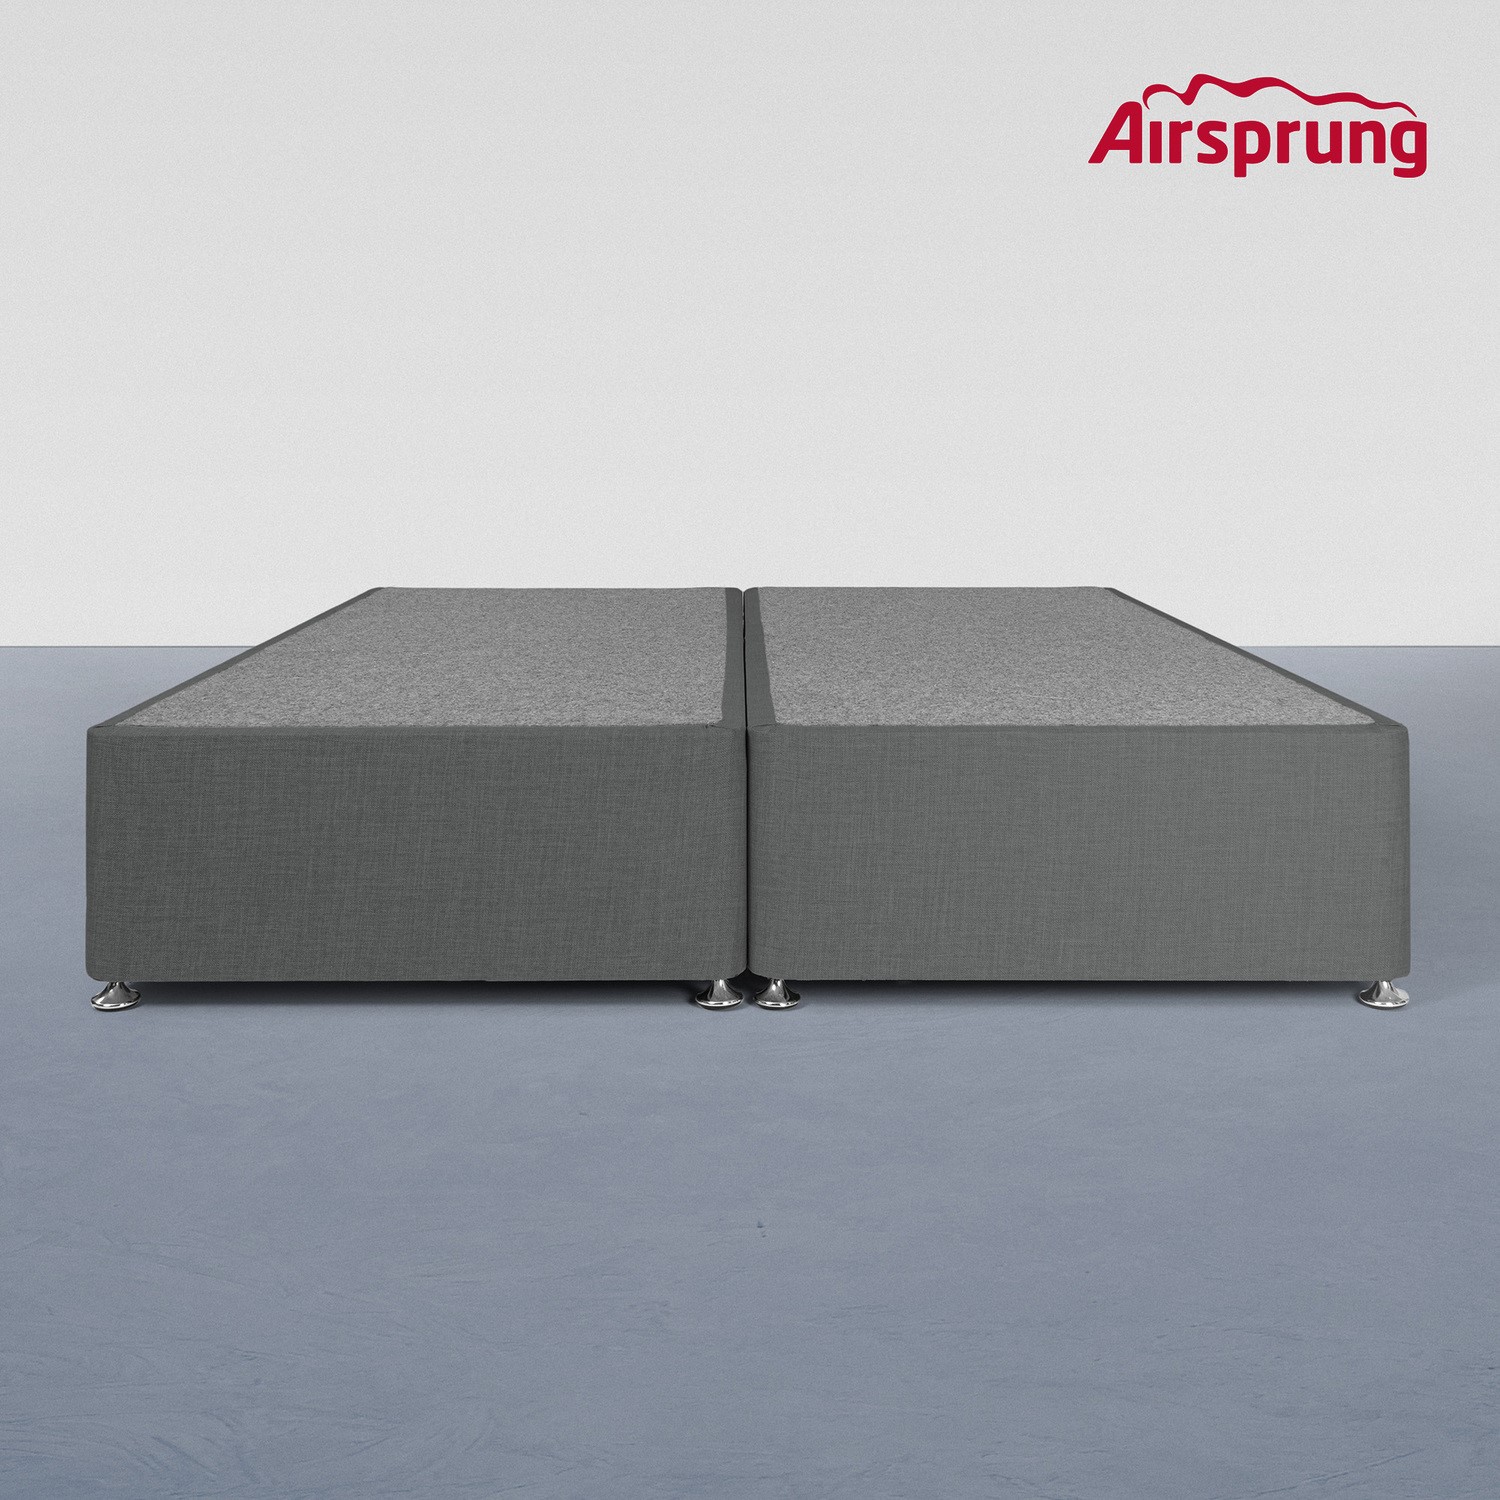 Read more about Airsprung kelston super king 4 drawer divan charcoal